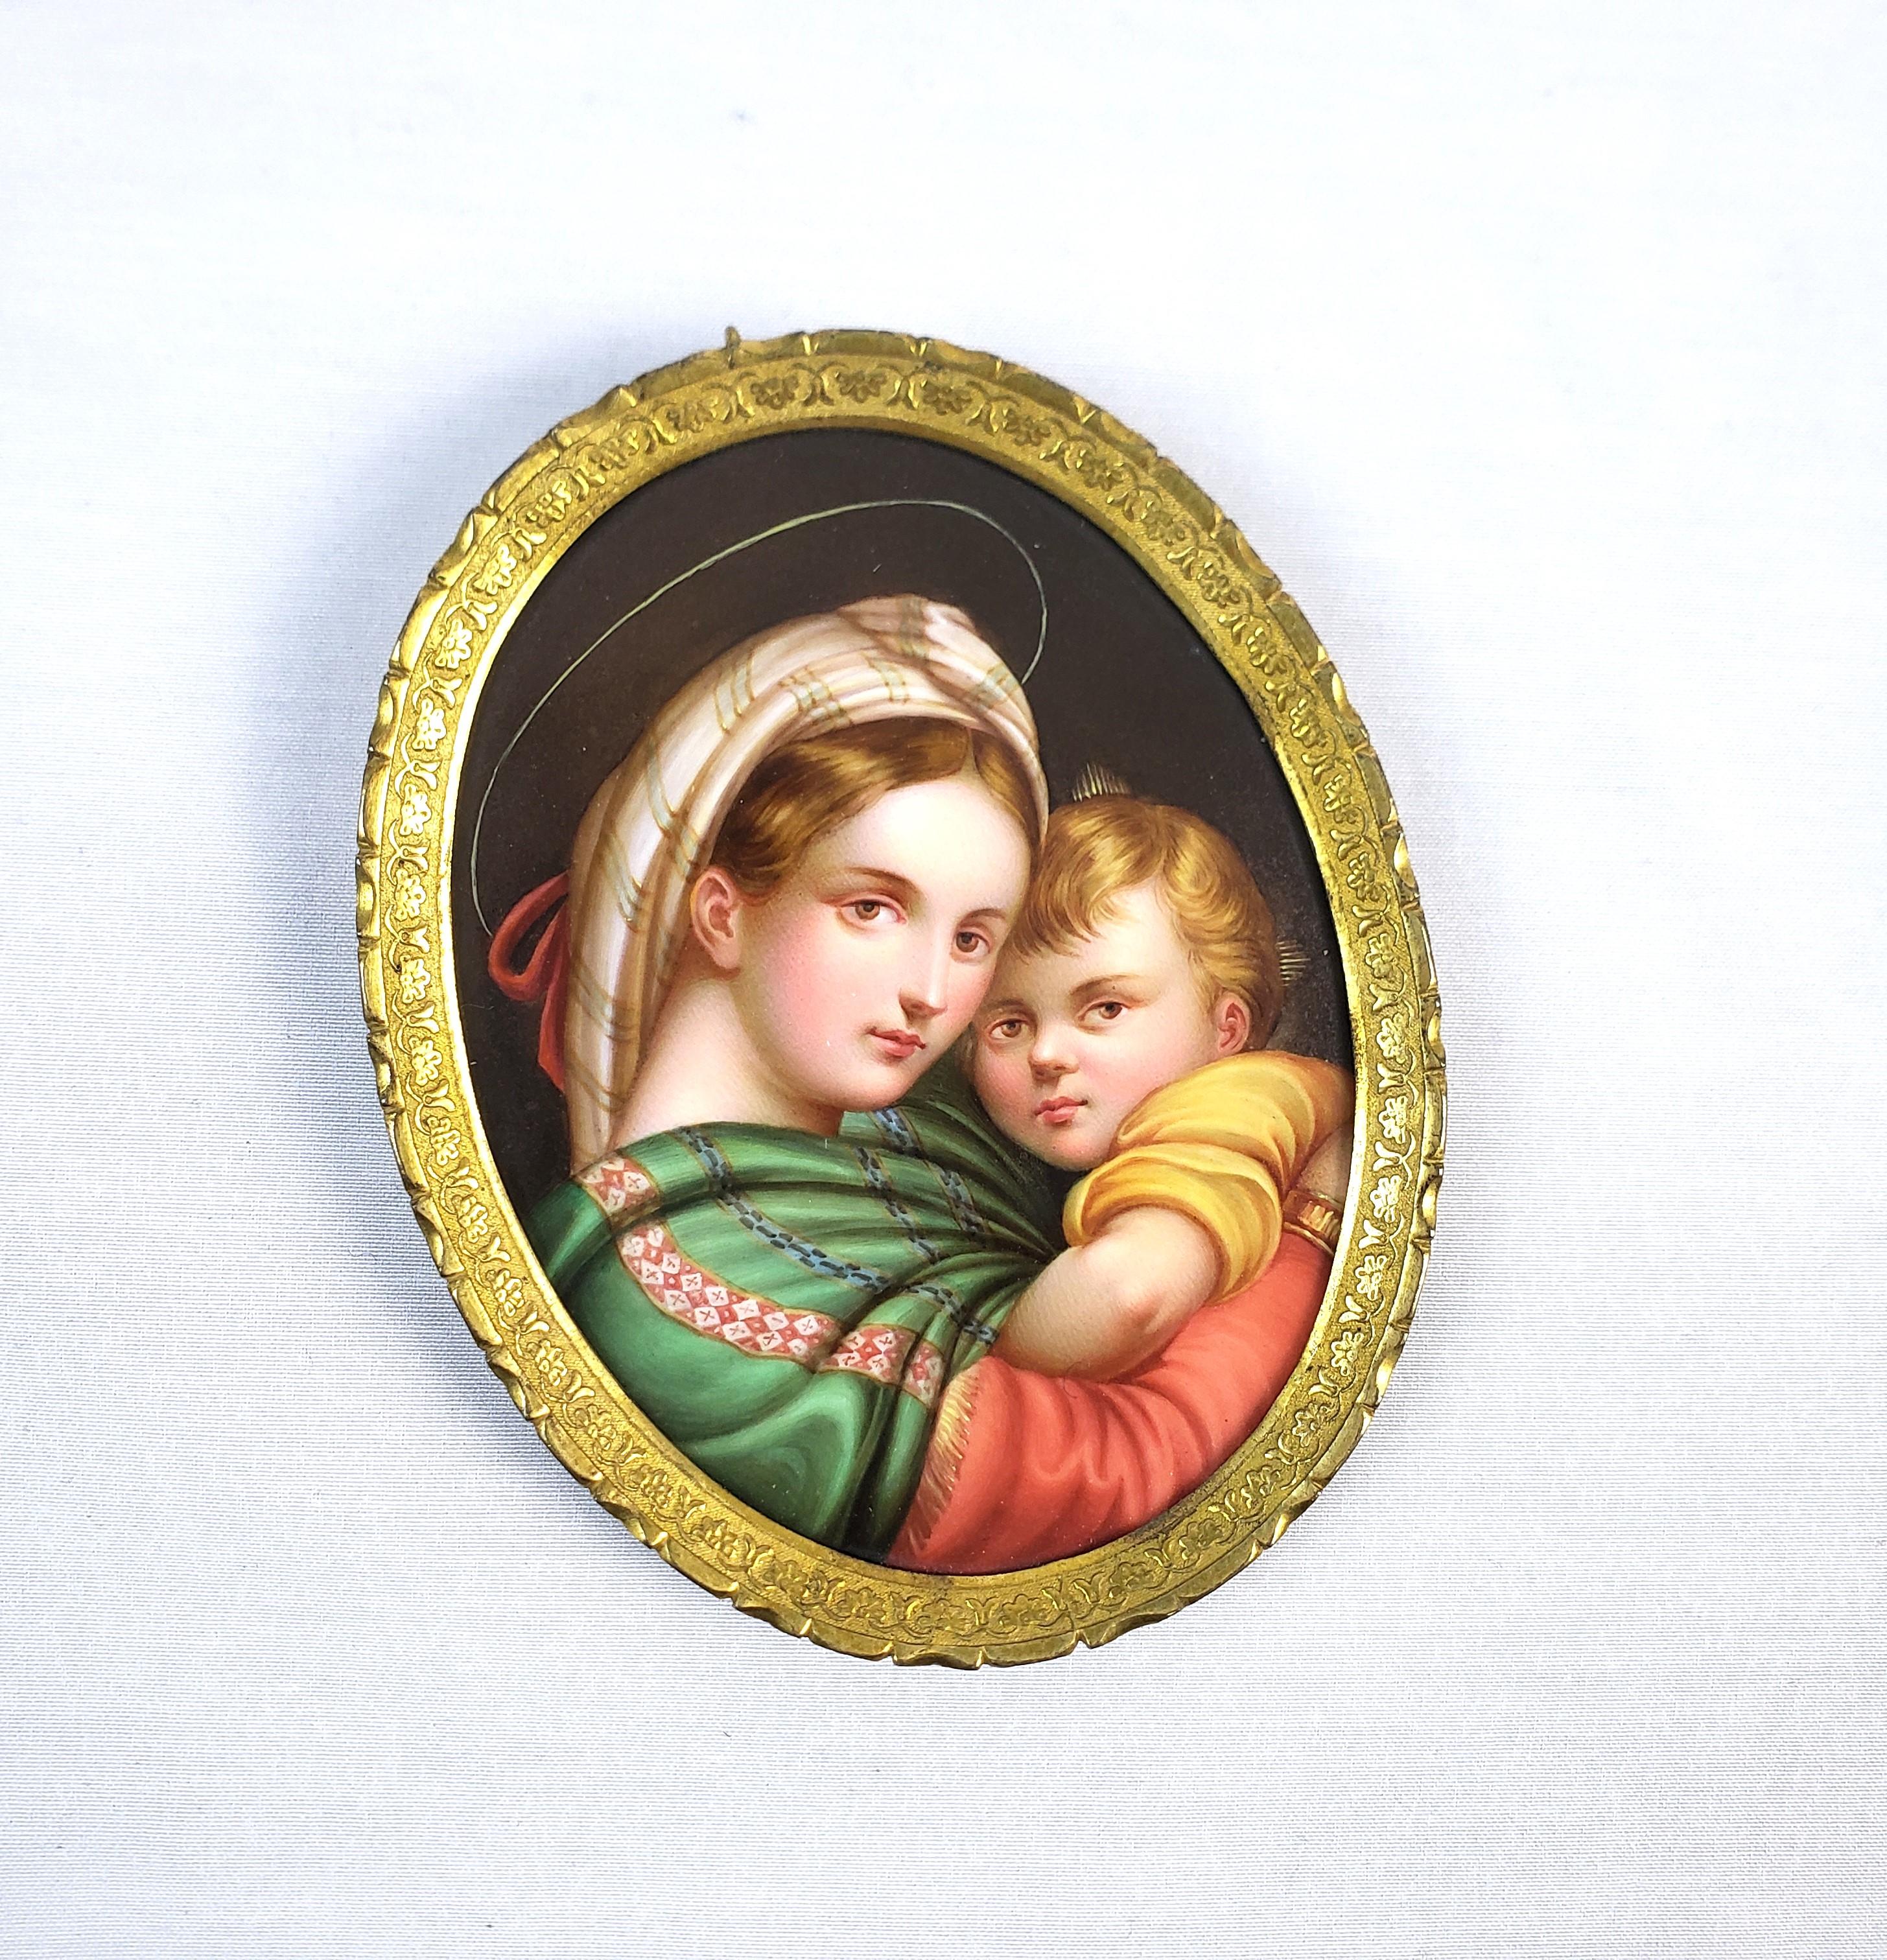 This finely executed portrait is unsigned and presumed to have originated from Italy and date to approximately 1900 and done in a Renaissance style. The portrait is hand-painted on a porcealin medallion and depicts the iconic image of the Madonna de